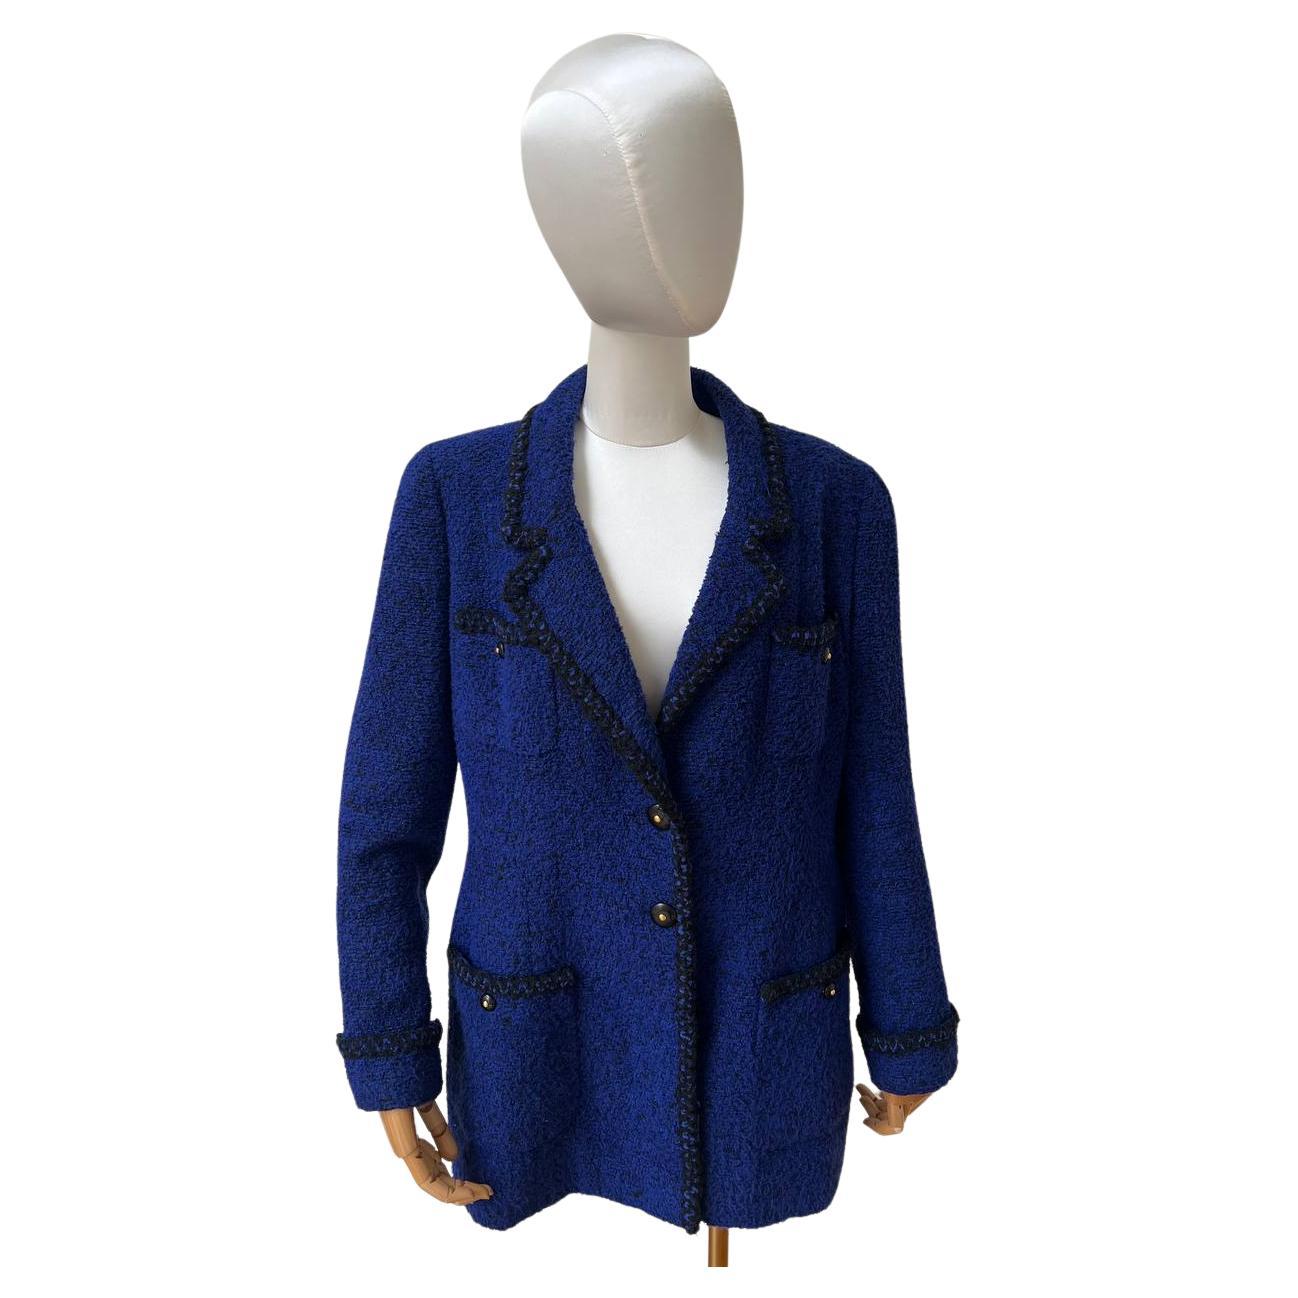 Vintage Blue Tweed Double-breasted Chanel Jacket, 1995